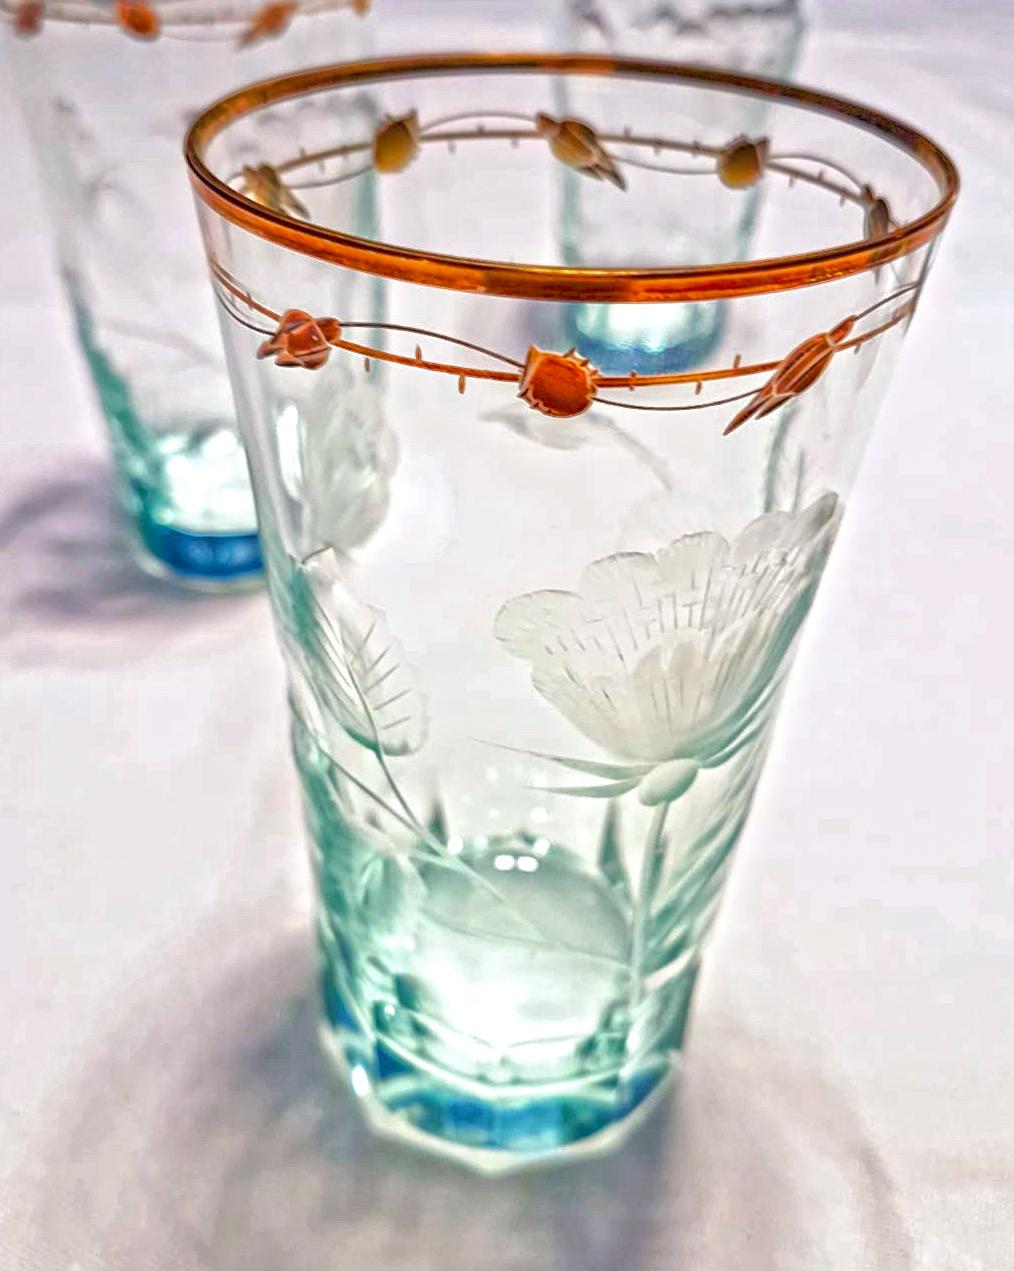 Engraved Very Rare Turquoise, Art Nouveau Hand Blown, Gilded Glasses 'Paula' by Moser